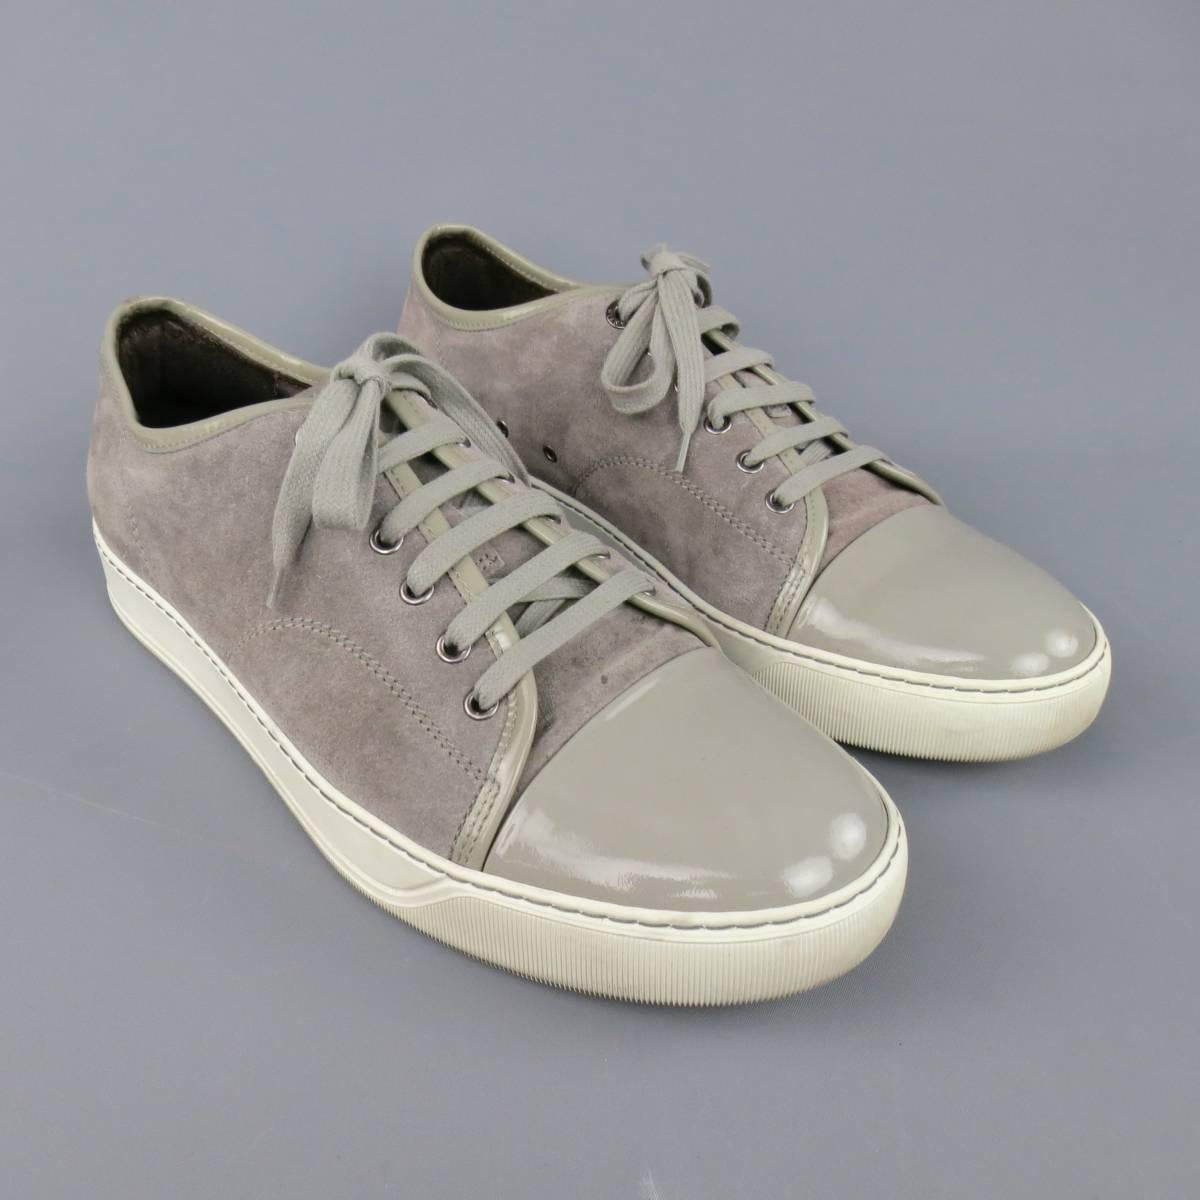 Classic LANVIN sneakers in silver gray suede featuring a patent leather toe cap and piping with a thick white rubber sole. With Box. Made in Portugal.
 
Excellent Pre-Owned Condition.
Marked: UK 9
 
Outsole: 12 x 4.45 in.